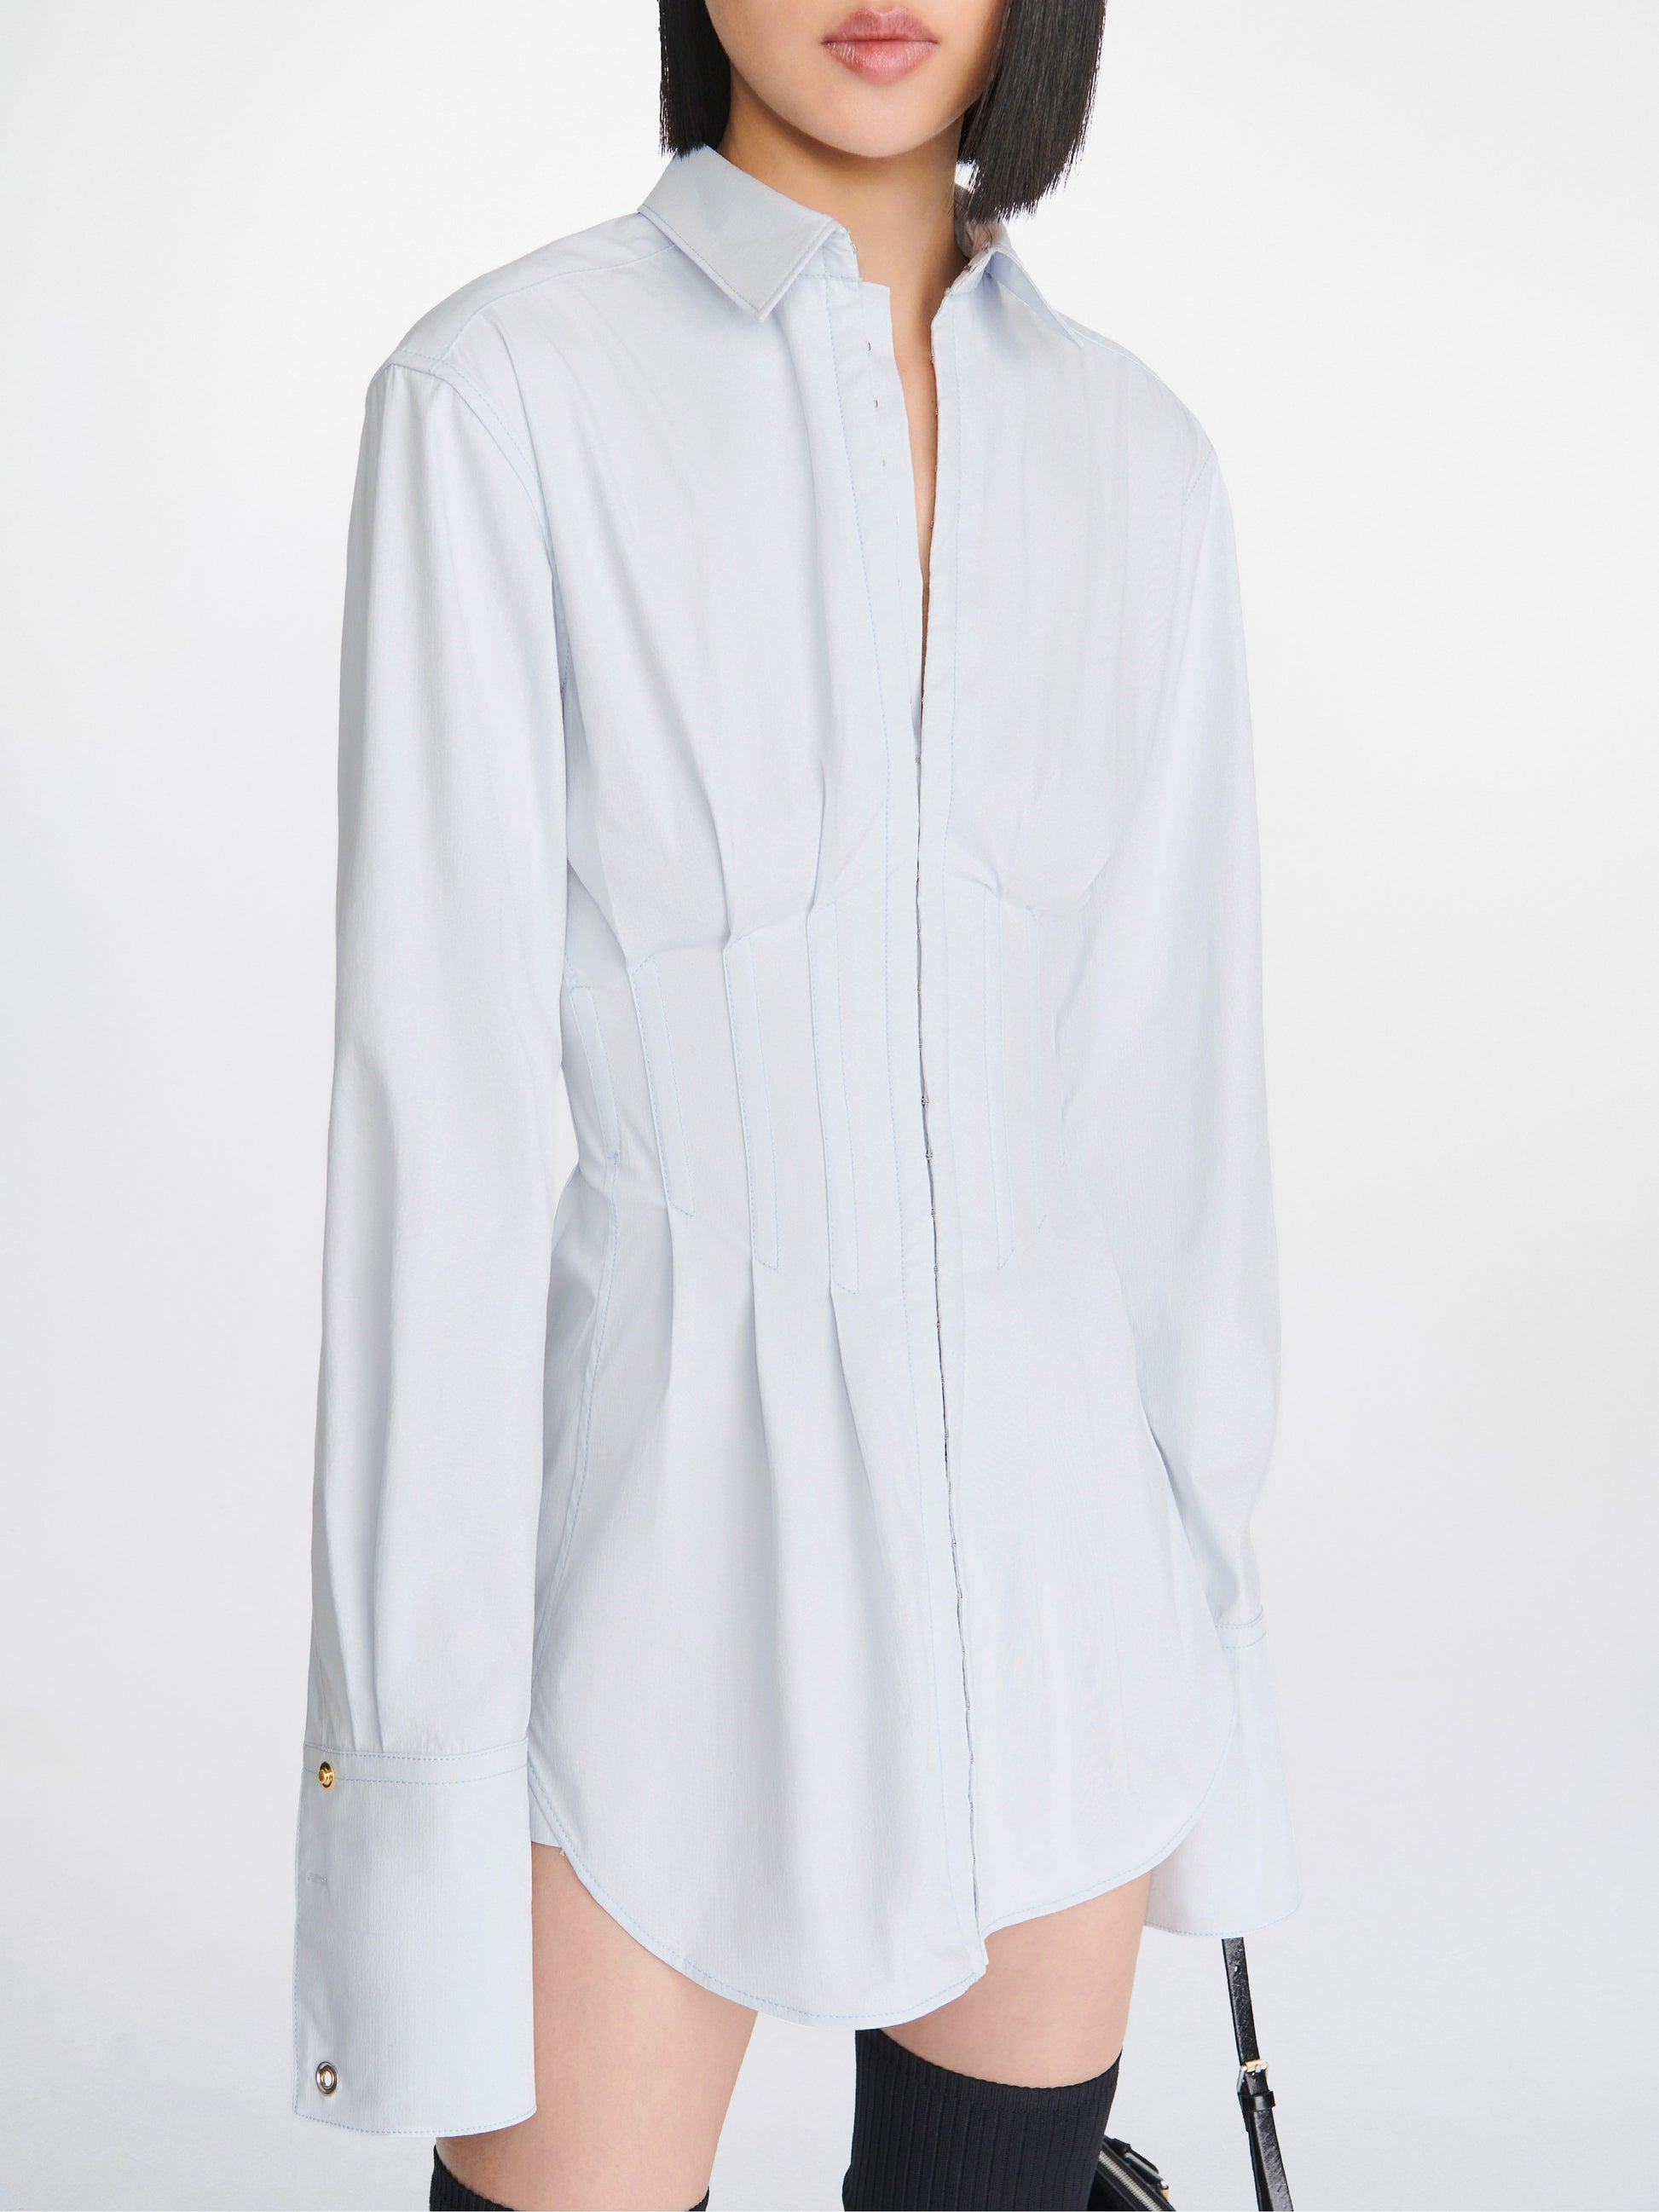 The Dion Lee Tuxedo Corset Shirt Dress in Steam available at The New Trend Australia